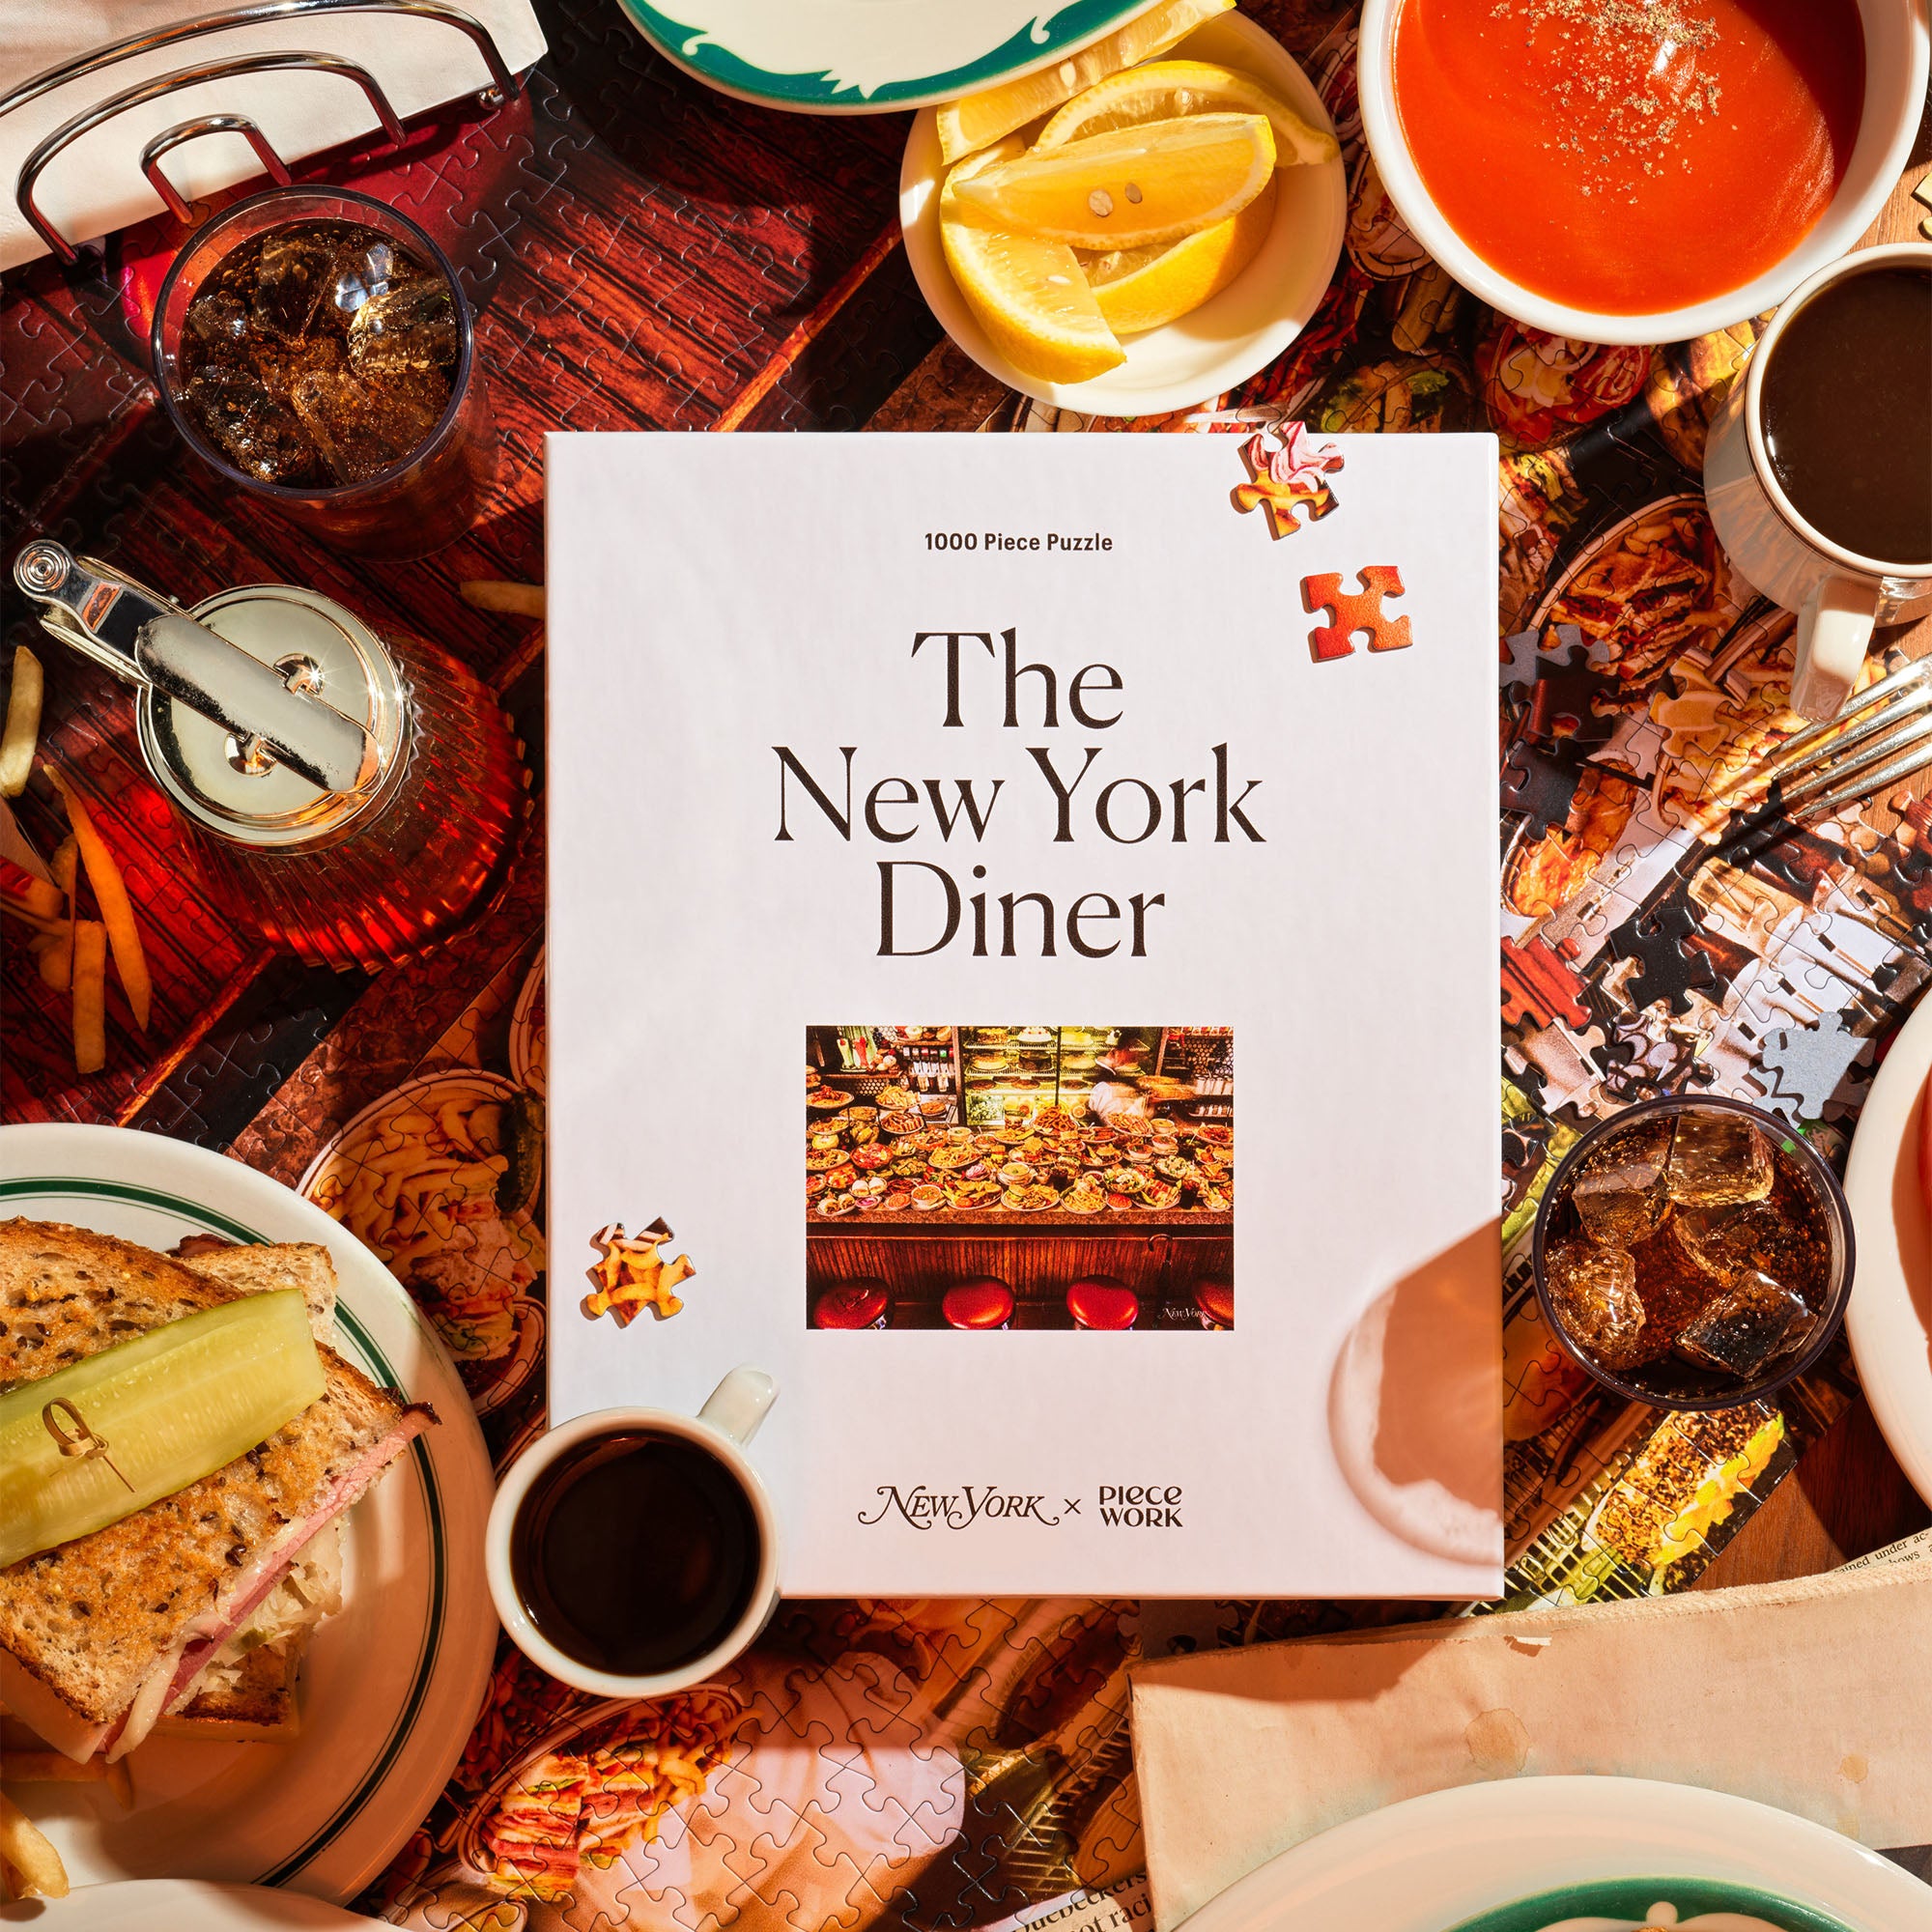 Diner　York　Puzzles　–　Piecework　The　New